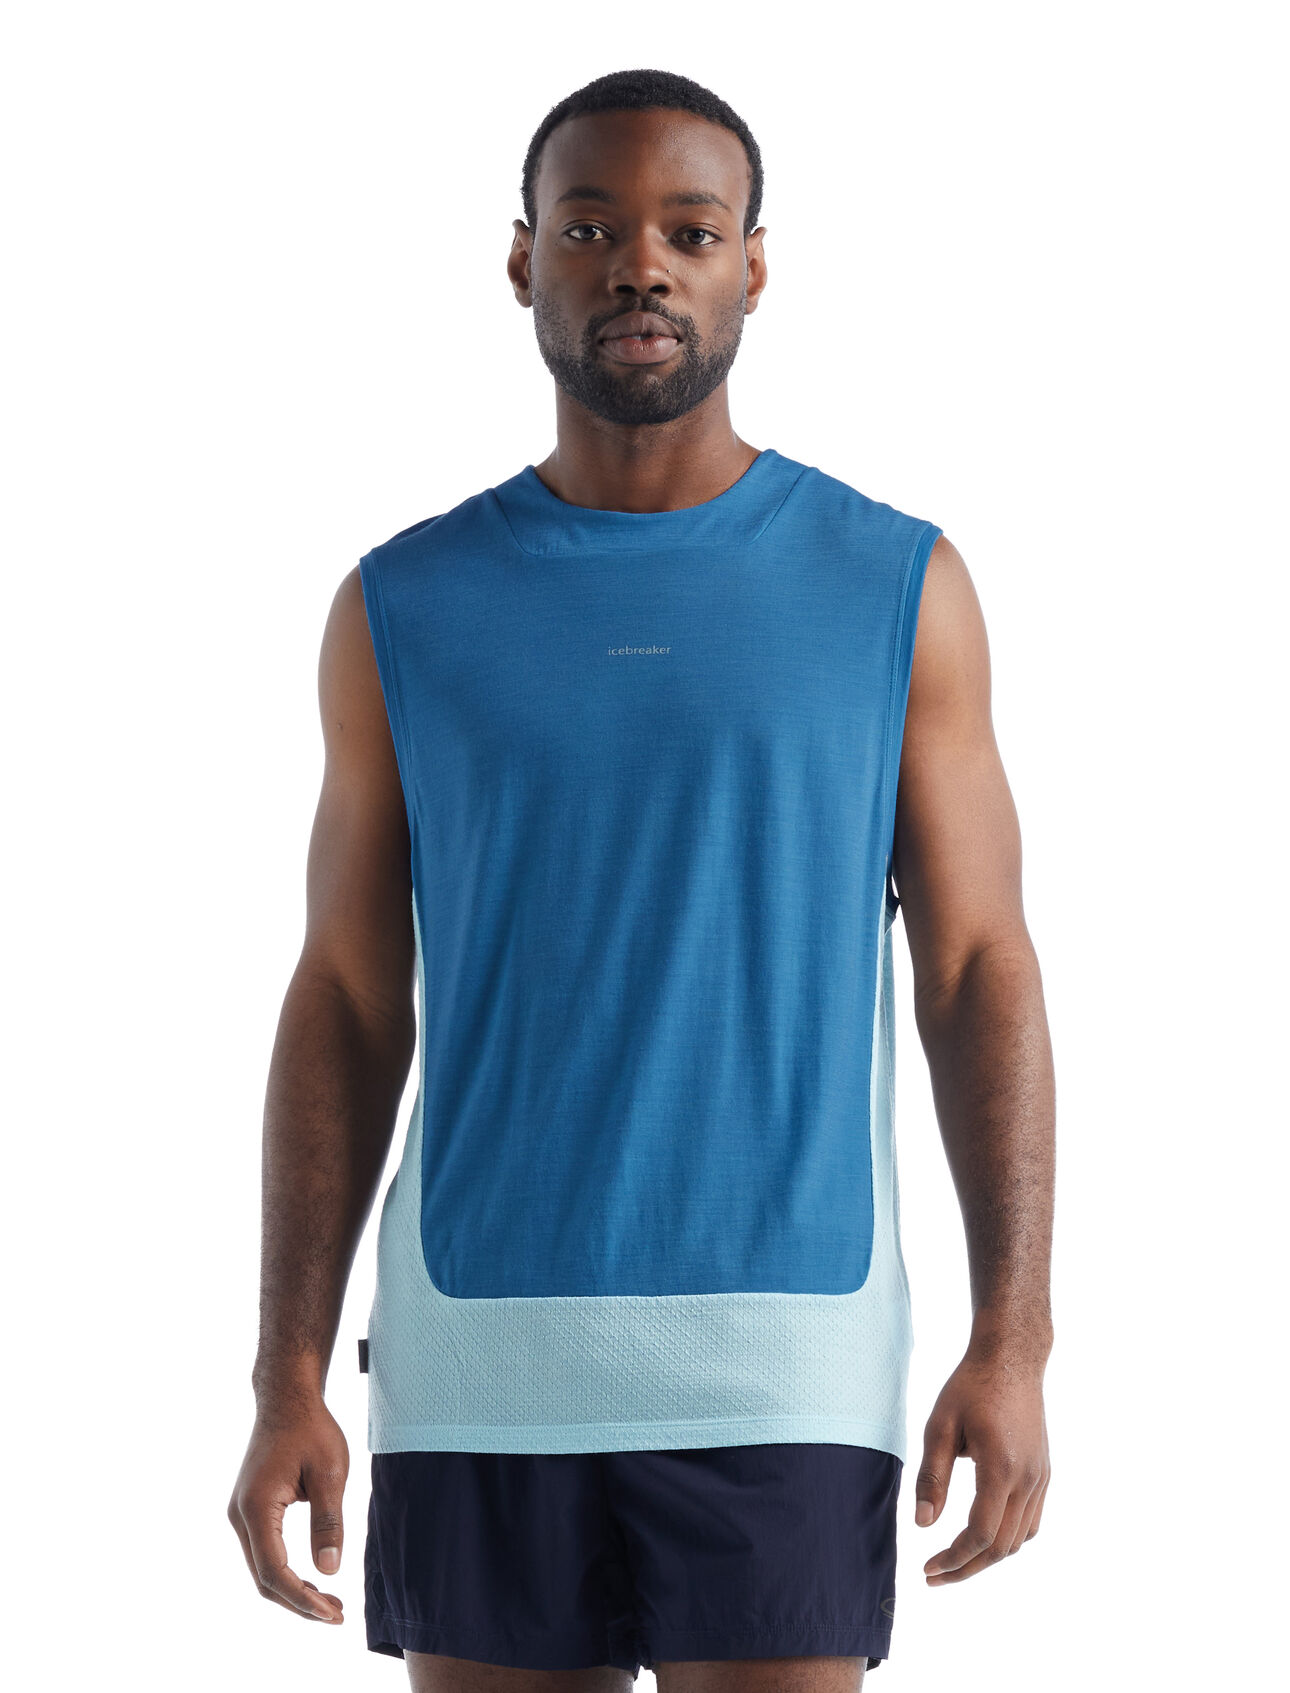 Mens ZoneKnit™ Merino Tank Our most breathable and lightweight tank designed for high-output adventures, the ZoneKnit™ Tank combines our Cool-Lite™ merino jersey fabric with eyelet mesh panels for exceptional breathability.